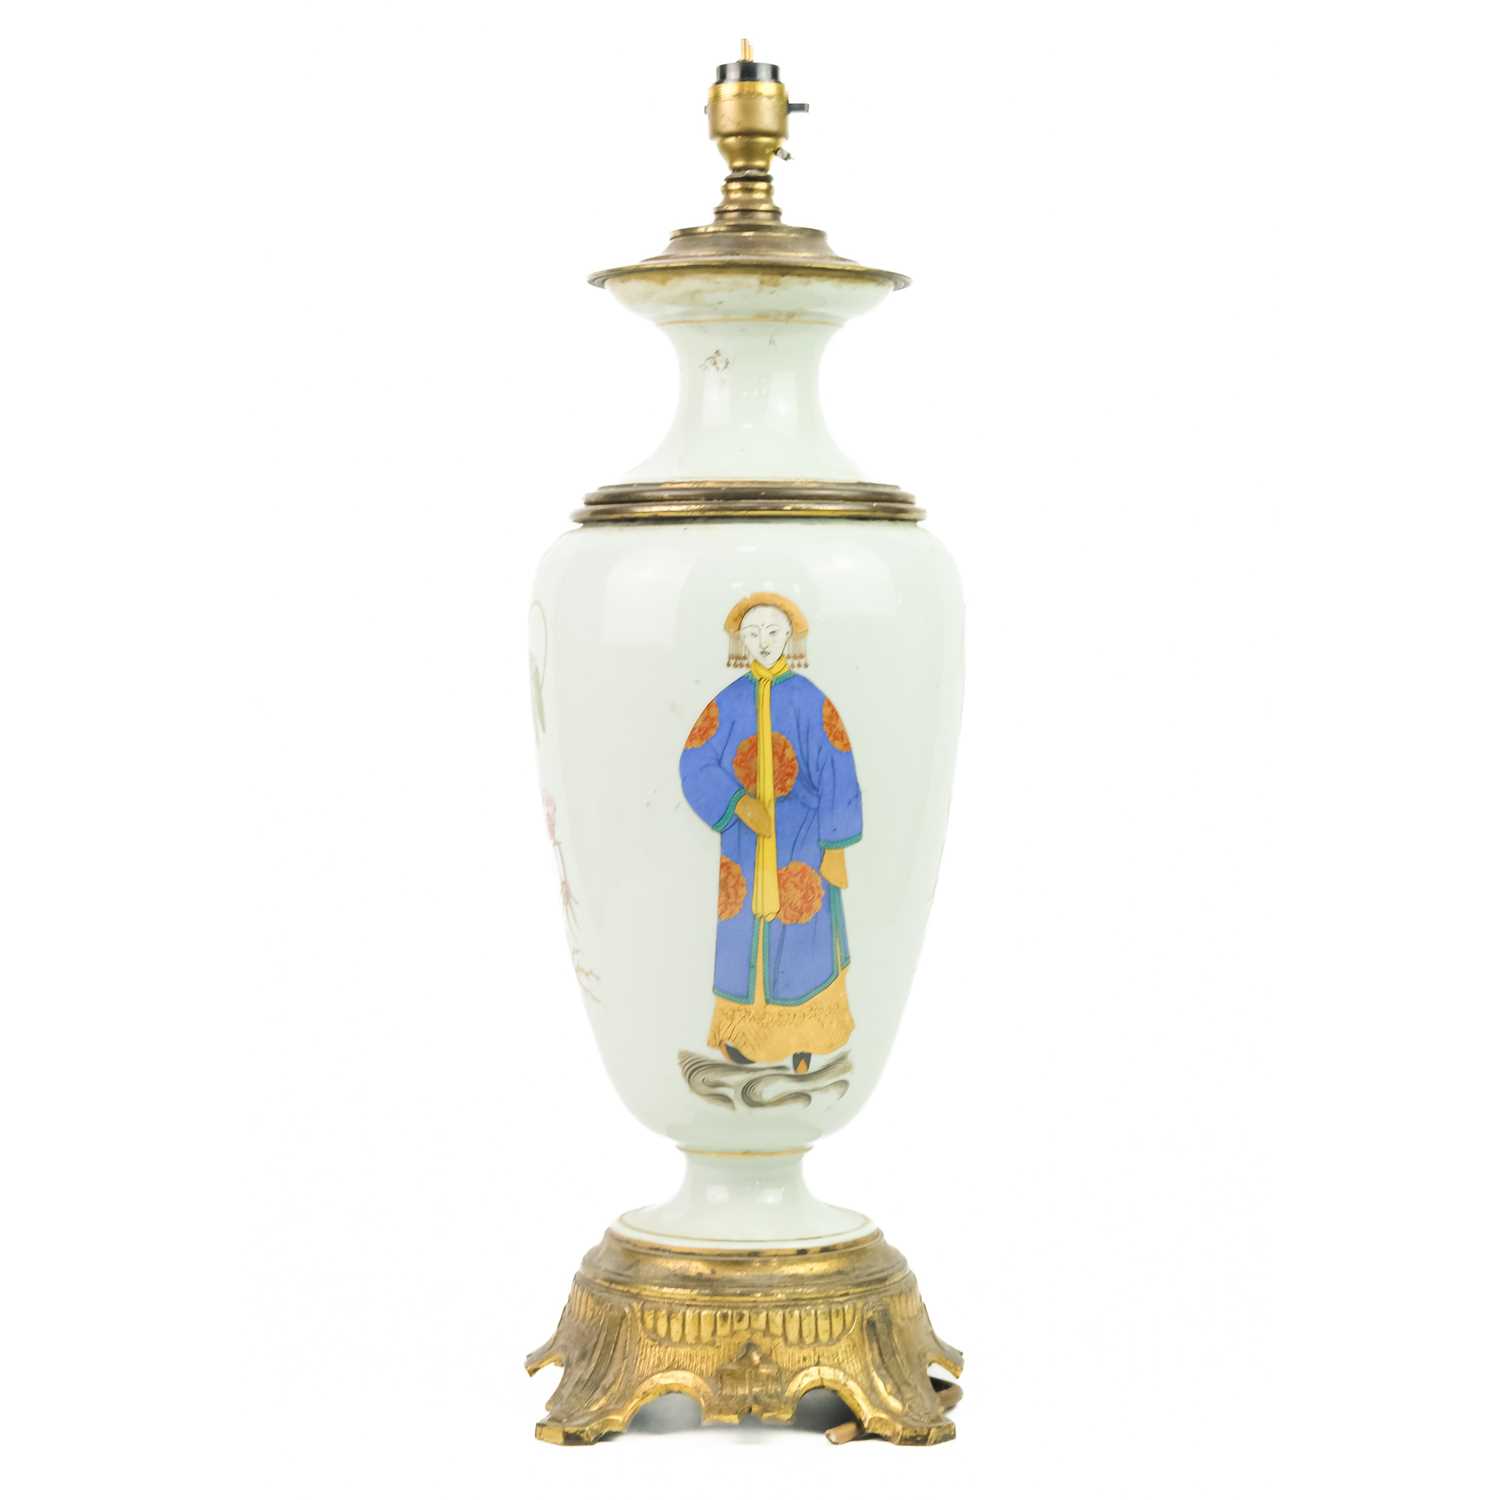 A porcelain and gilt metal oil lamp, late 19th century. - Image 2 of 6